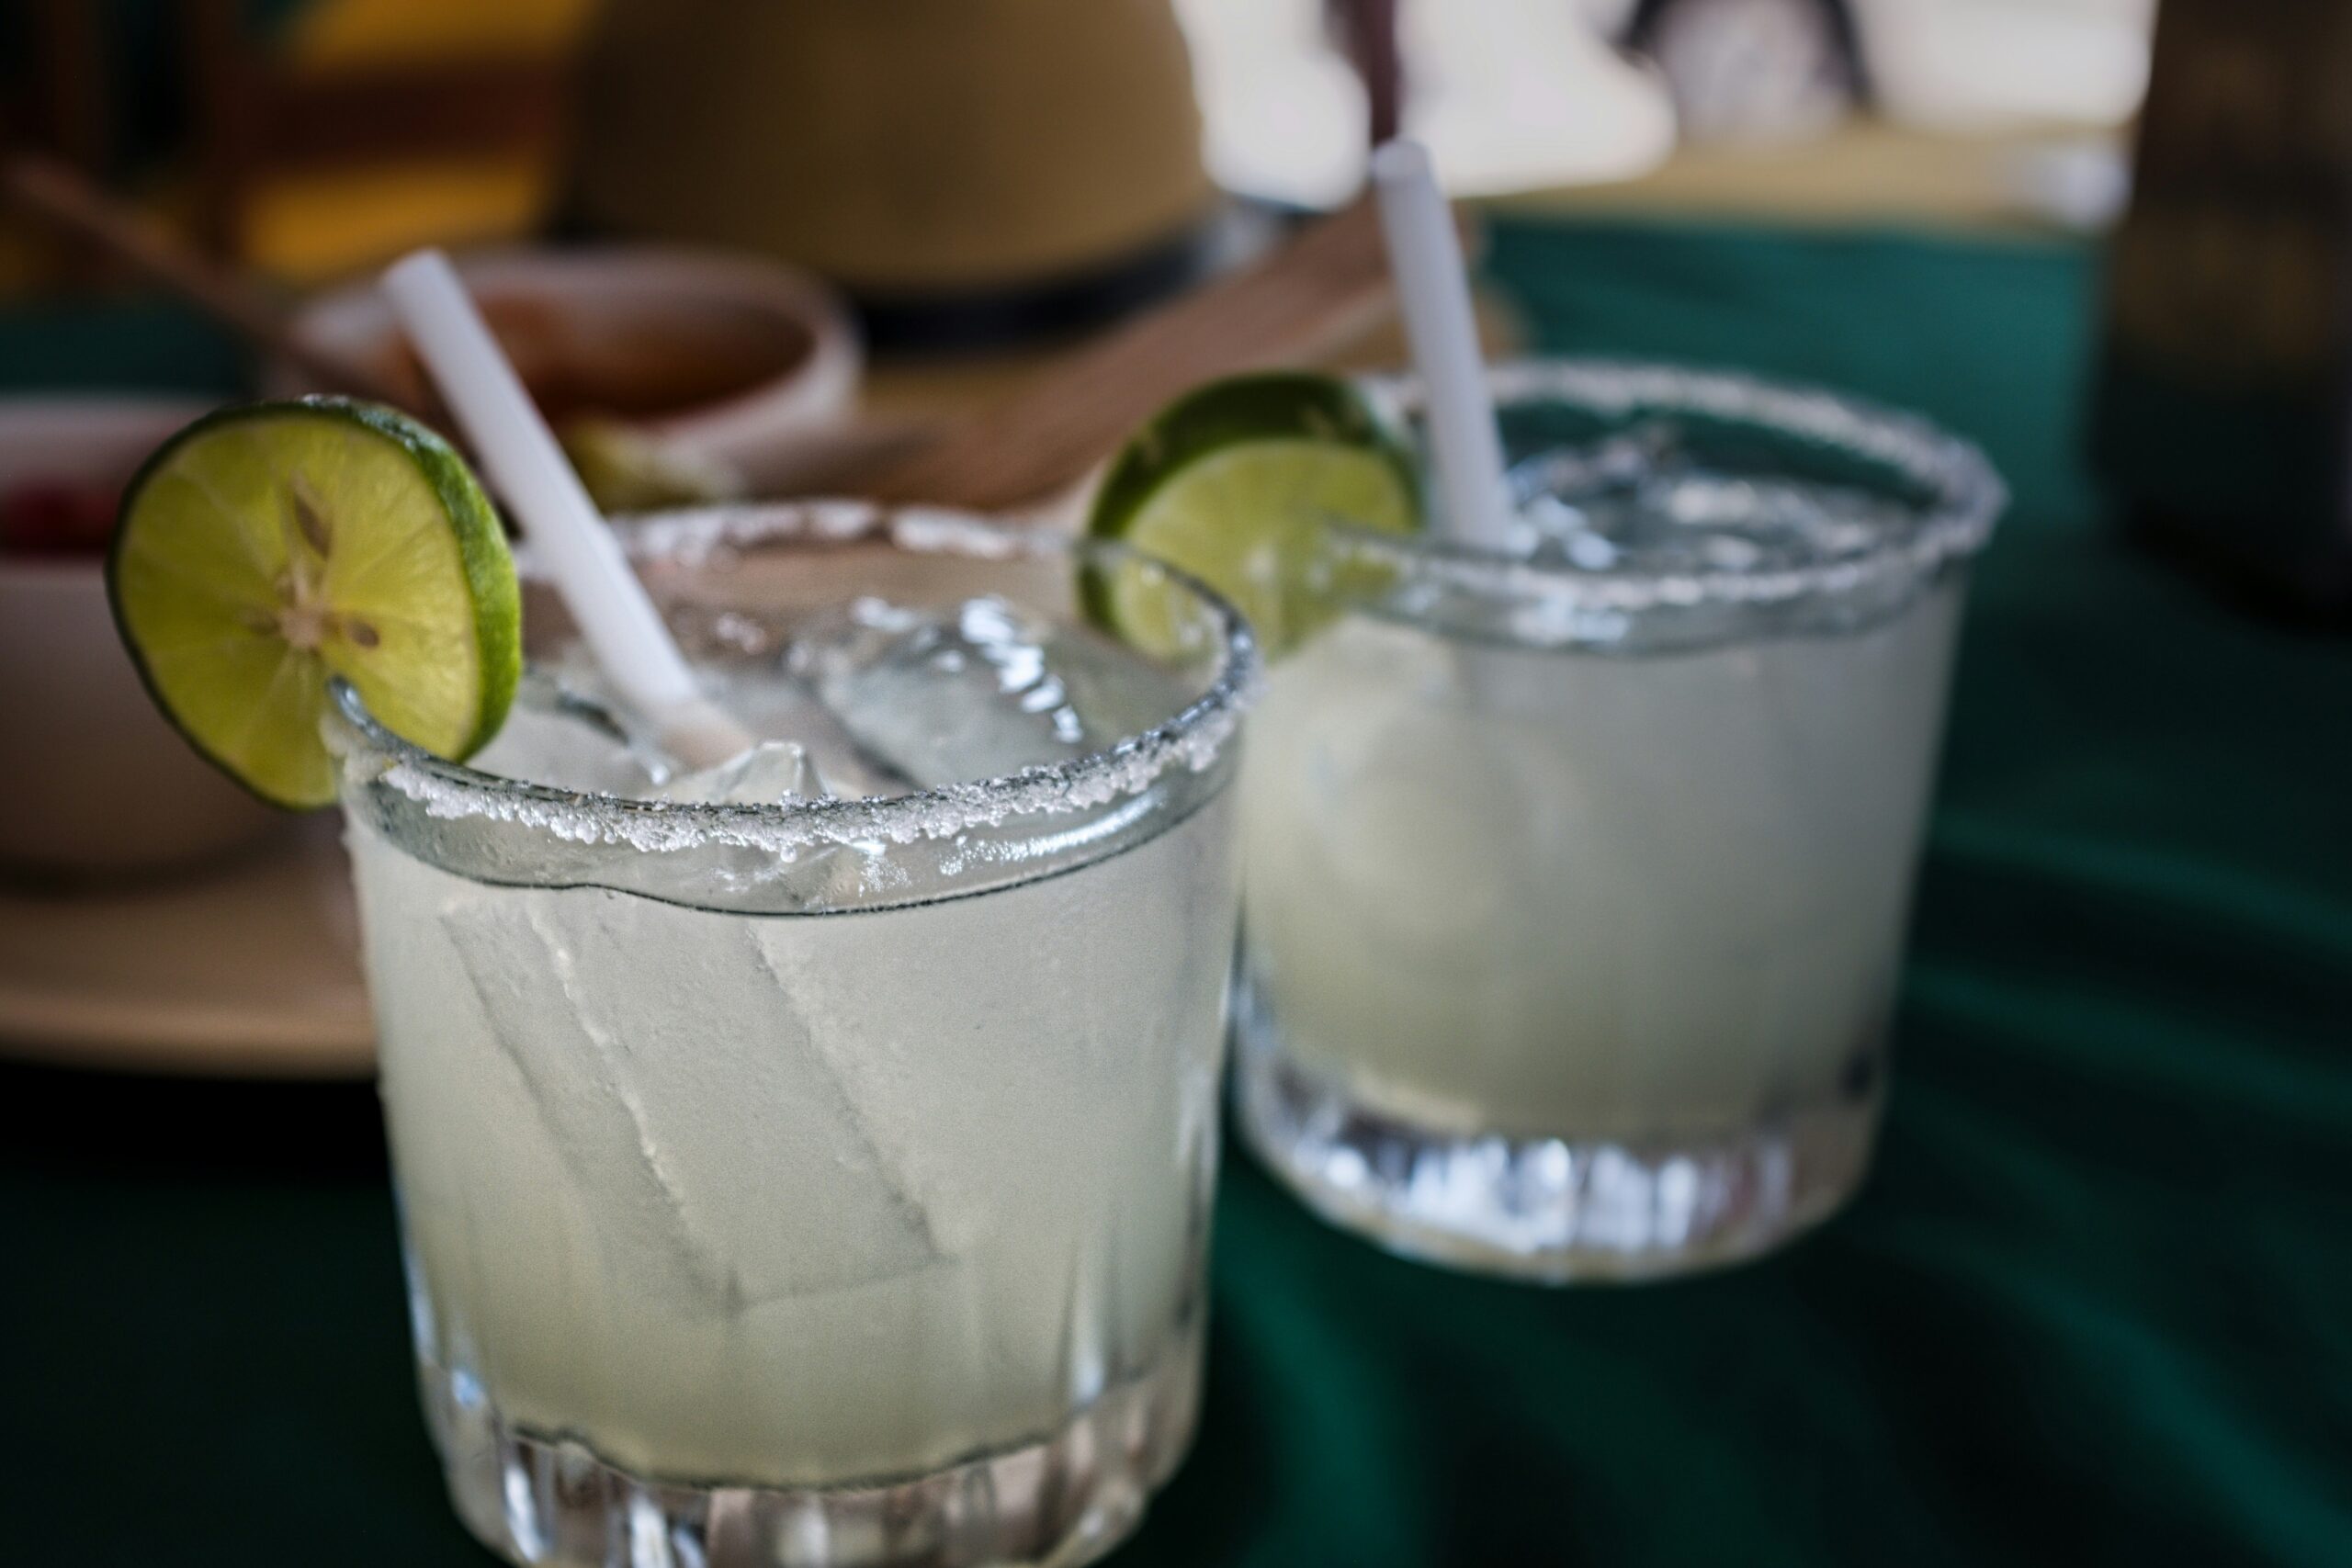 The classic margarita is one of the best tequila cocktails that everyone loves. Pictured: Margarita